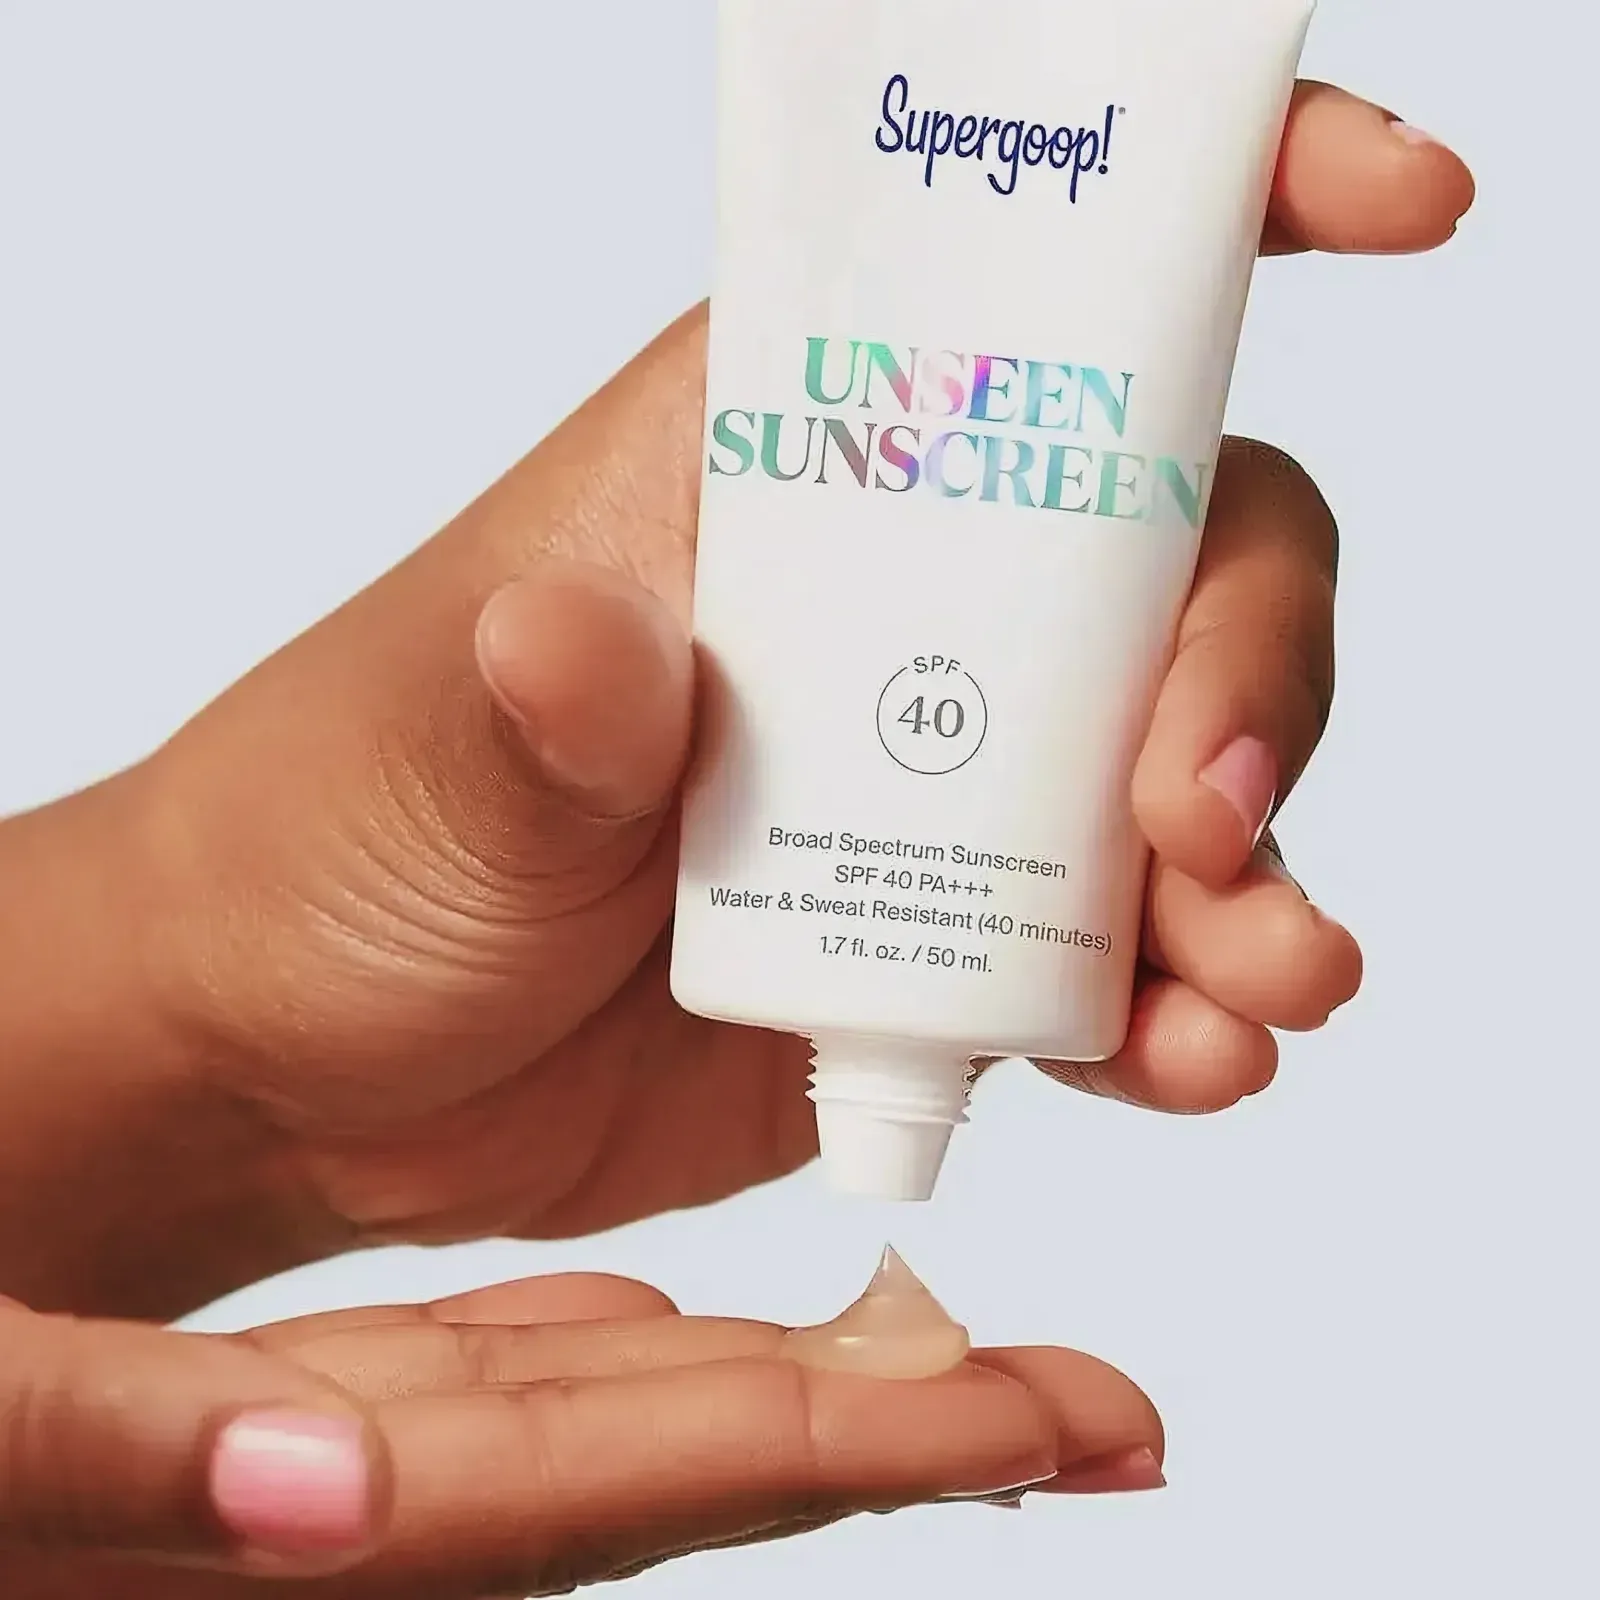 Close-up of a hand holding a tube of Supergoop! Unseen Sunscreen SPF 40 PA+++